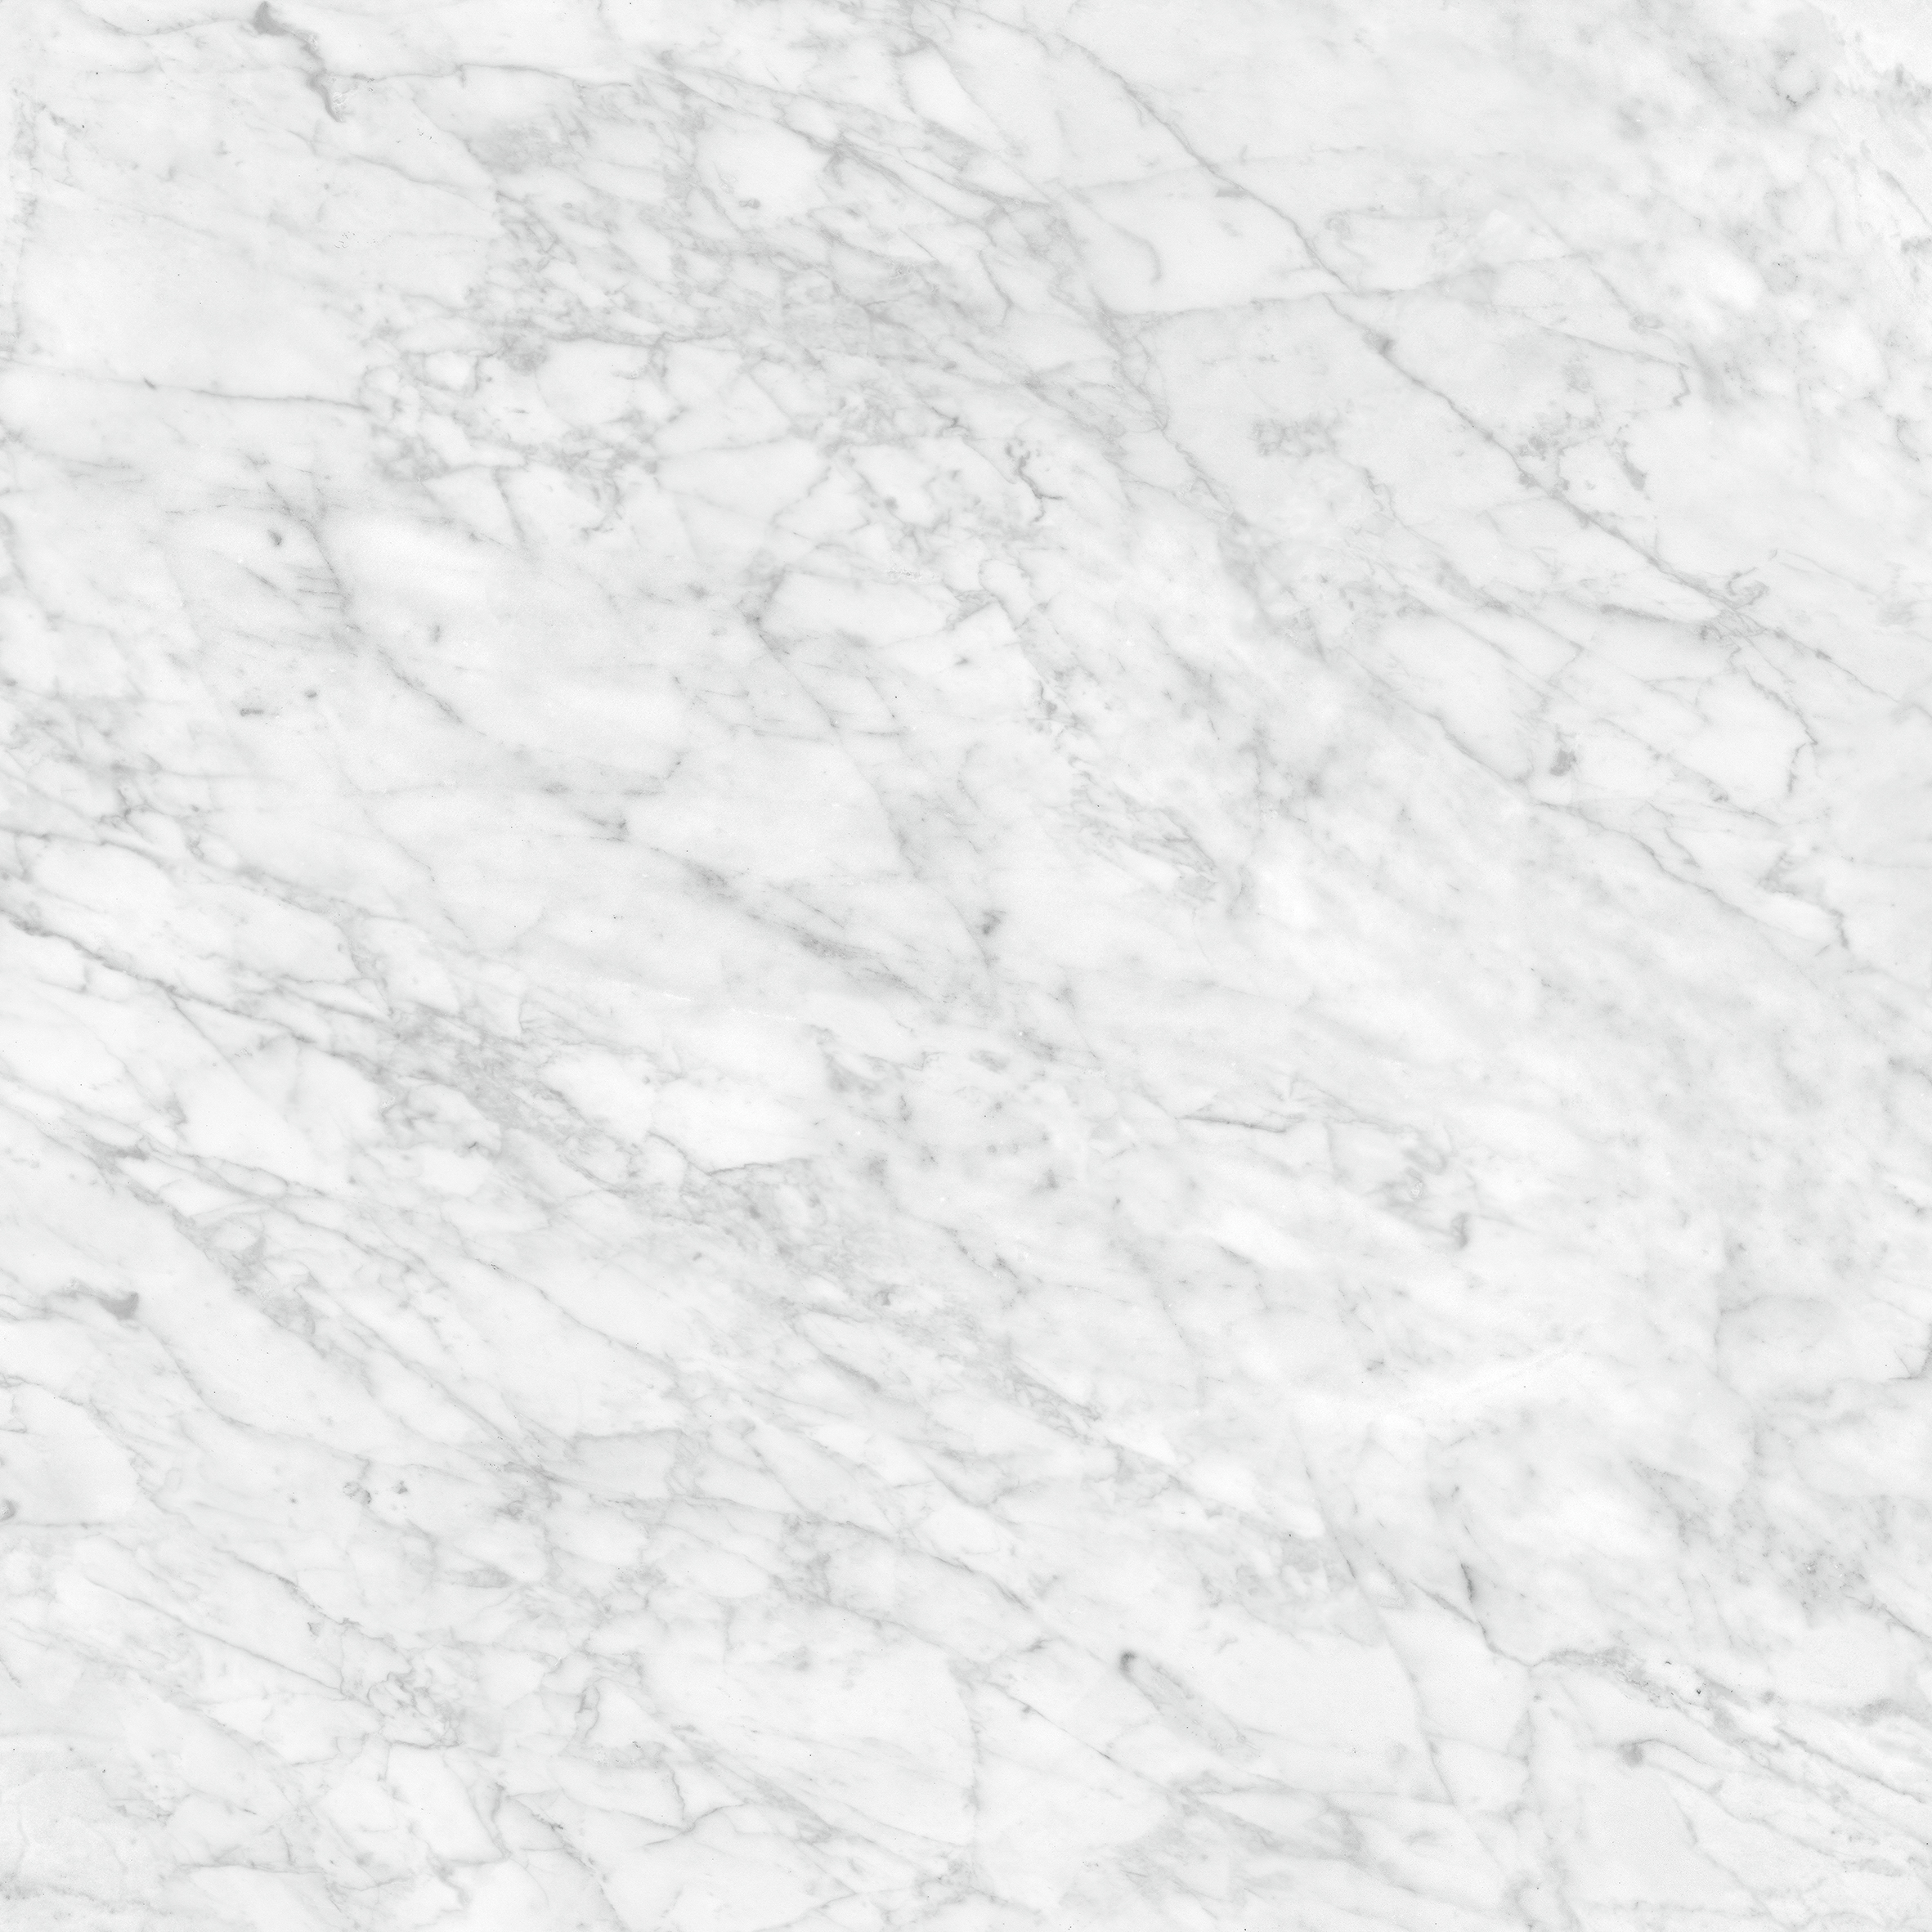 carrara gioia pattern glazed porcelain field tile from la marca anatolia collection distributed by surface group international honed finish rectified edge 32x32 square shape